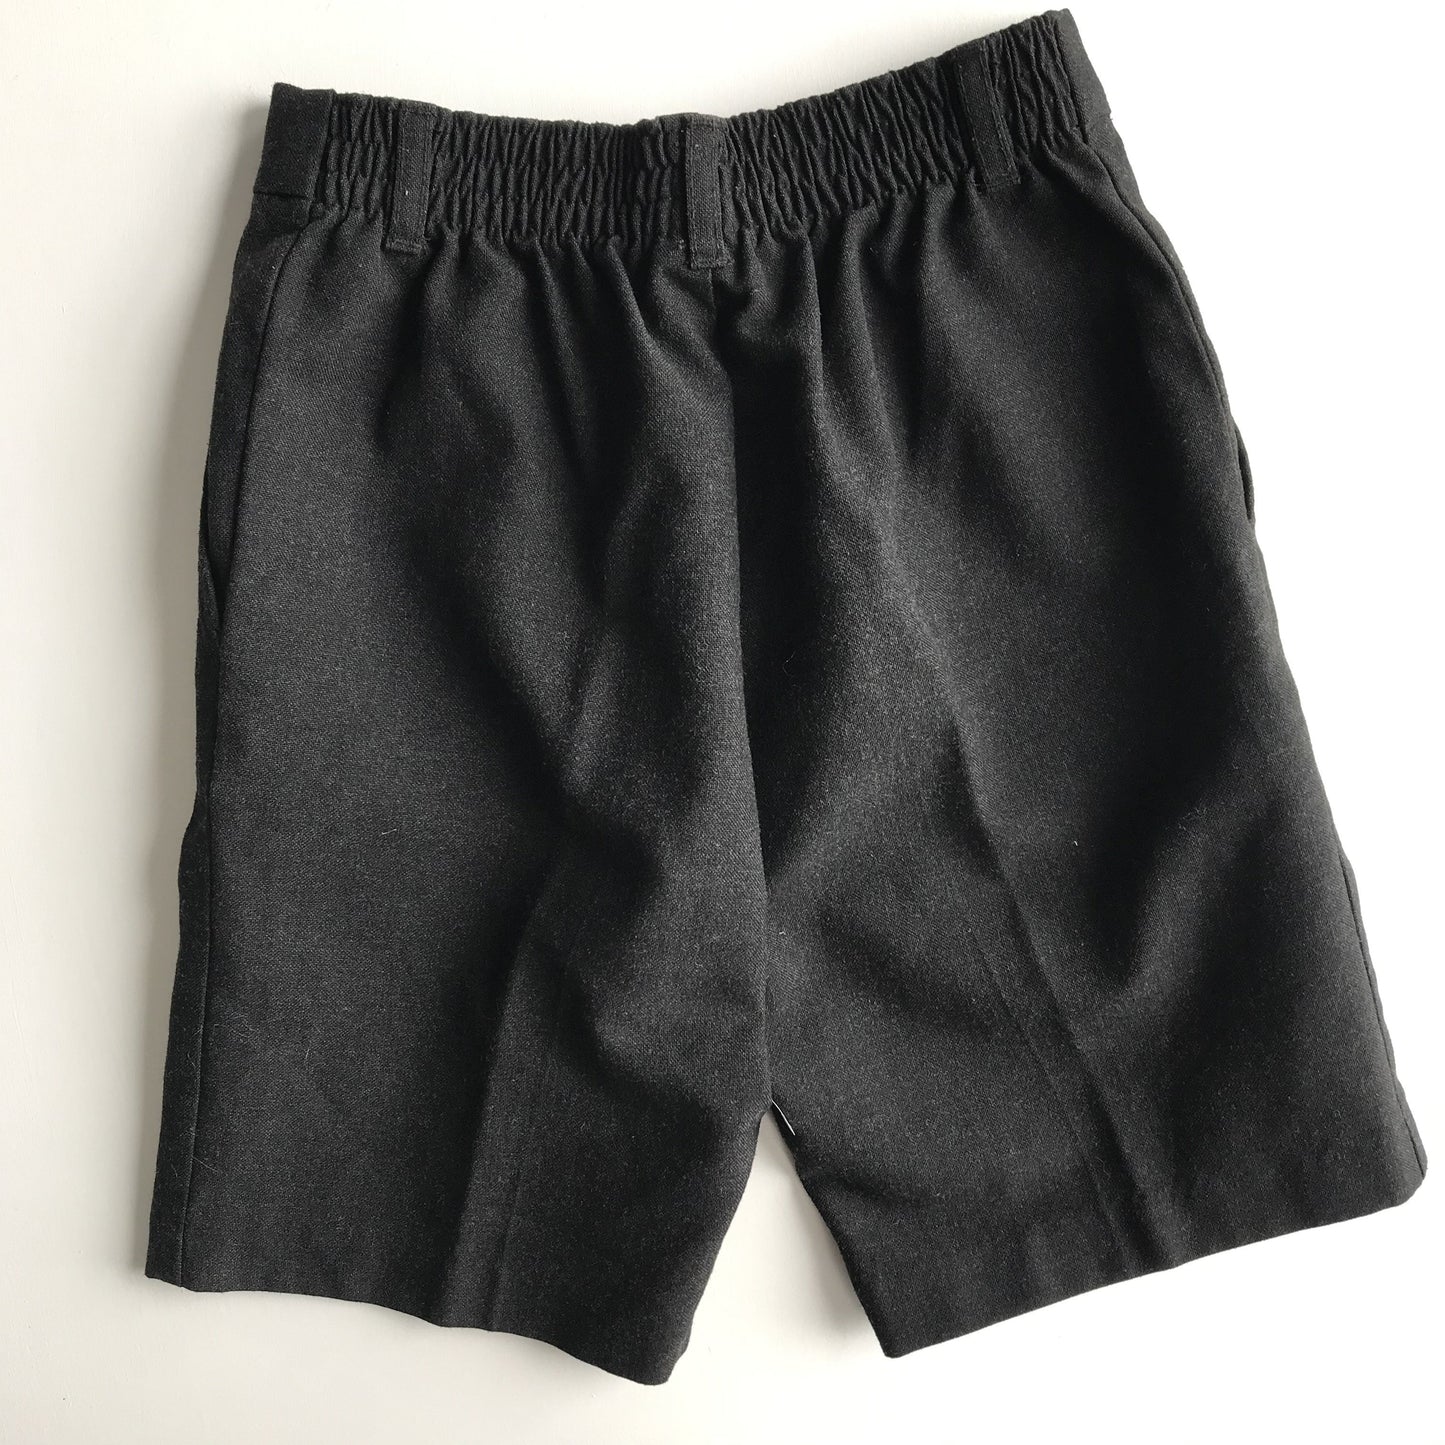 Charcoal Grey School Shorts with Elasticated Waist